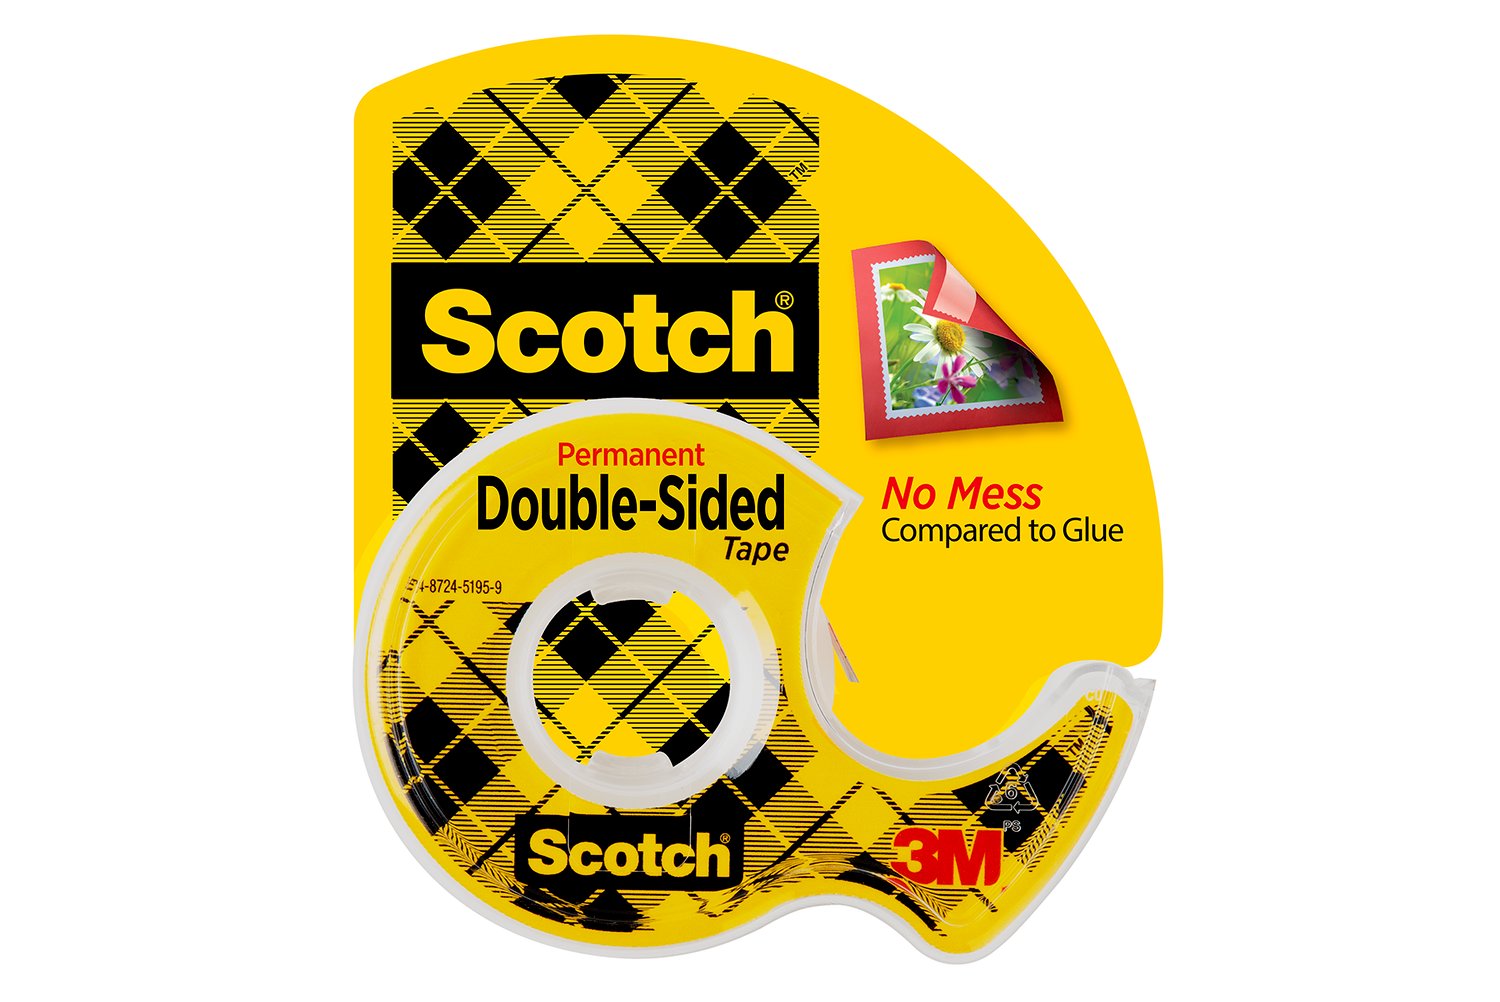 7100275536 - Scotch Double Sided Tape 137, 0.5 in x 450 in (12.7 mm x 11.4 m)